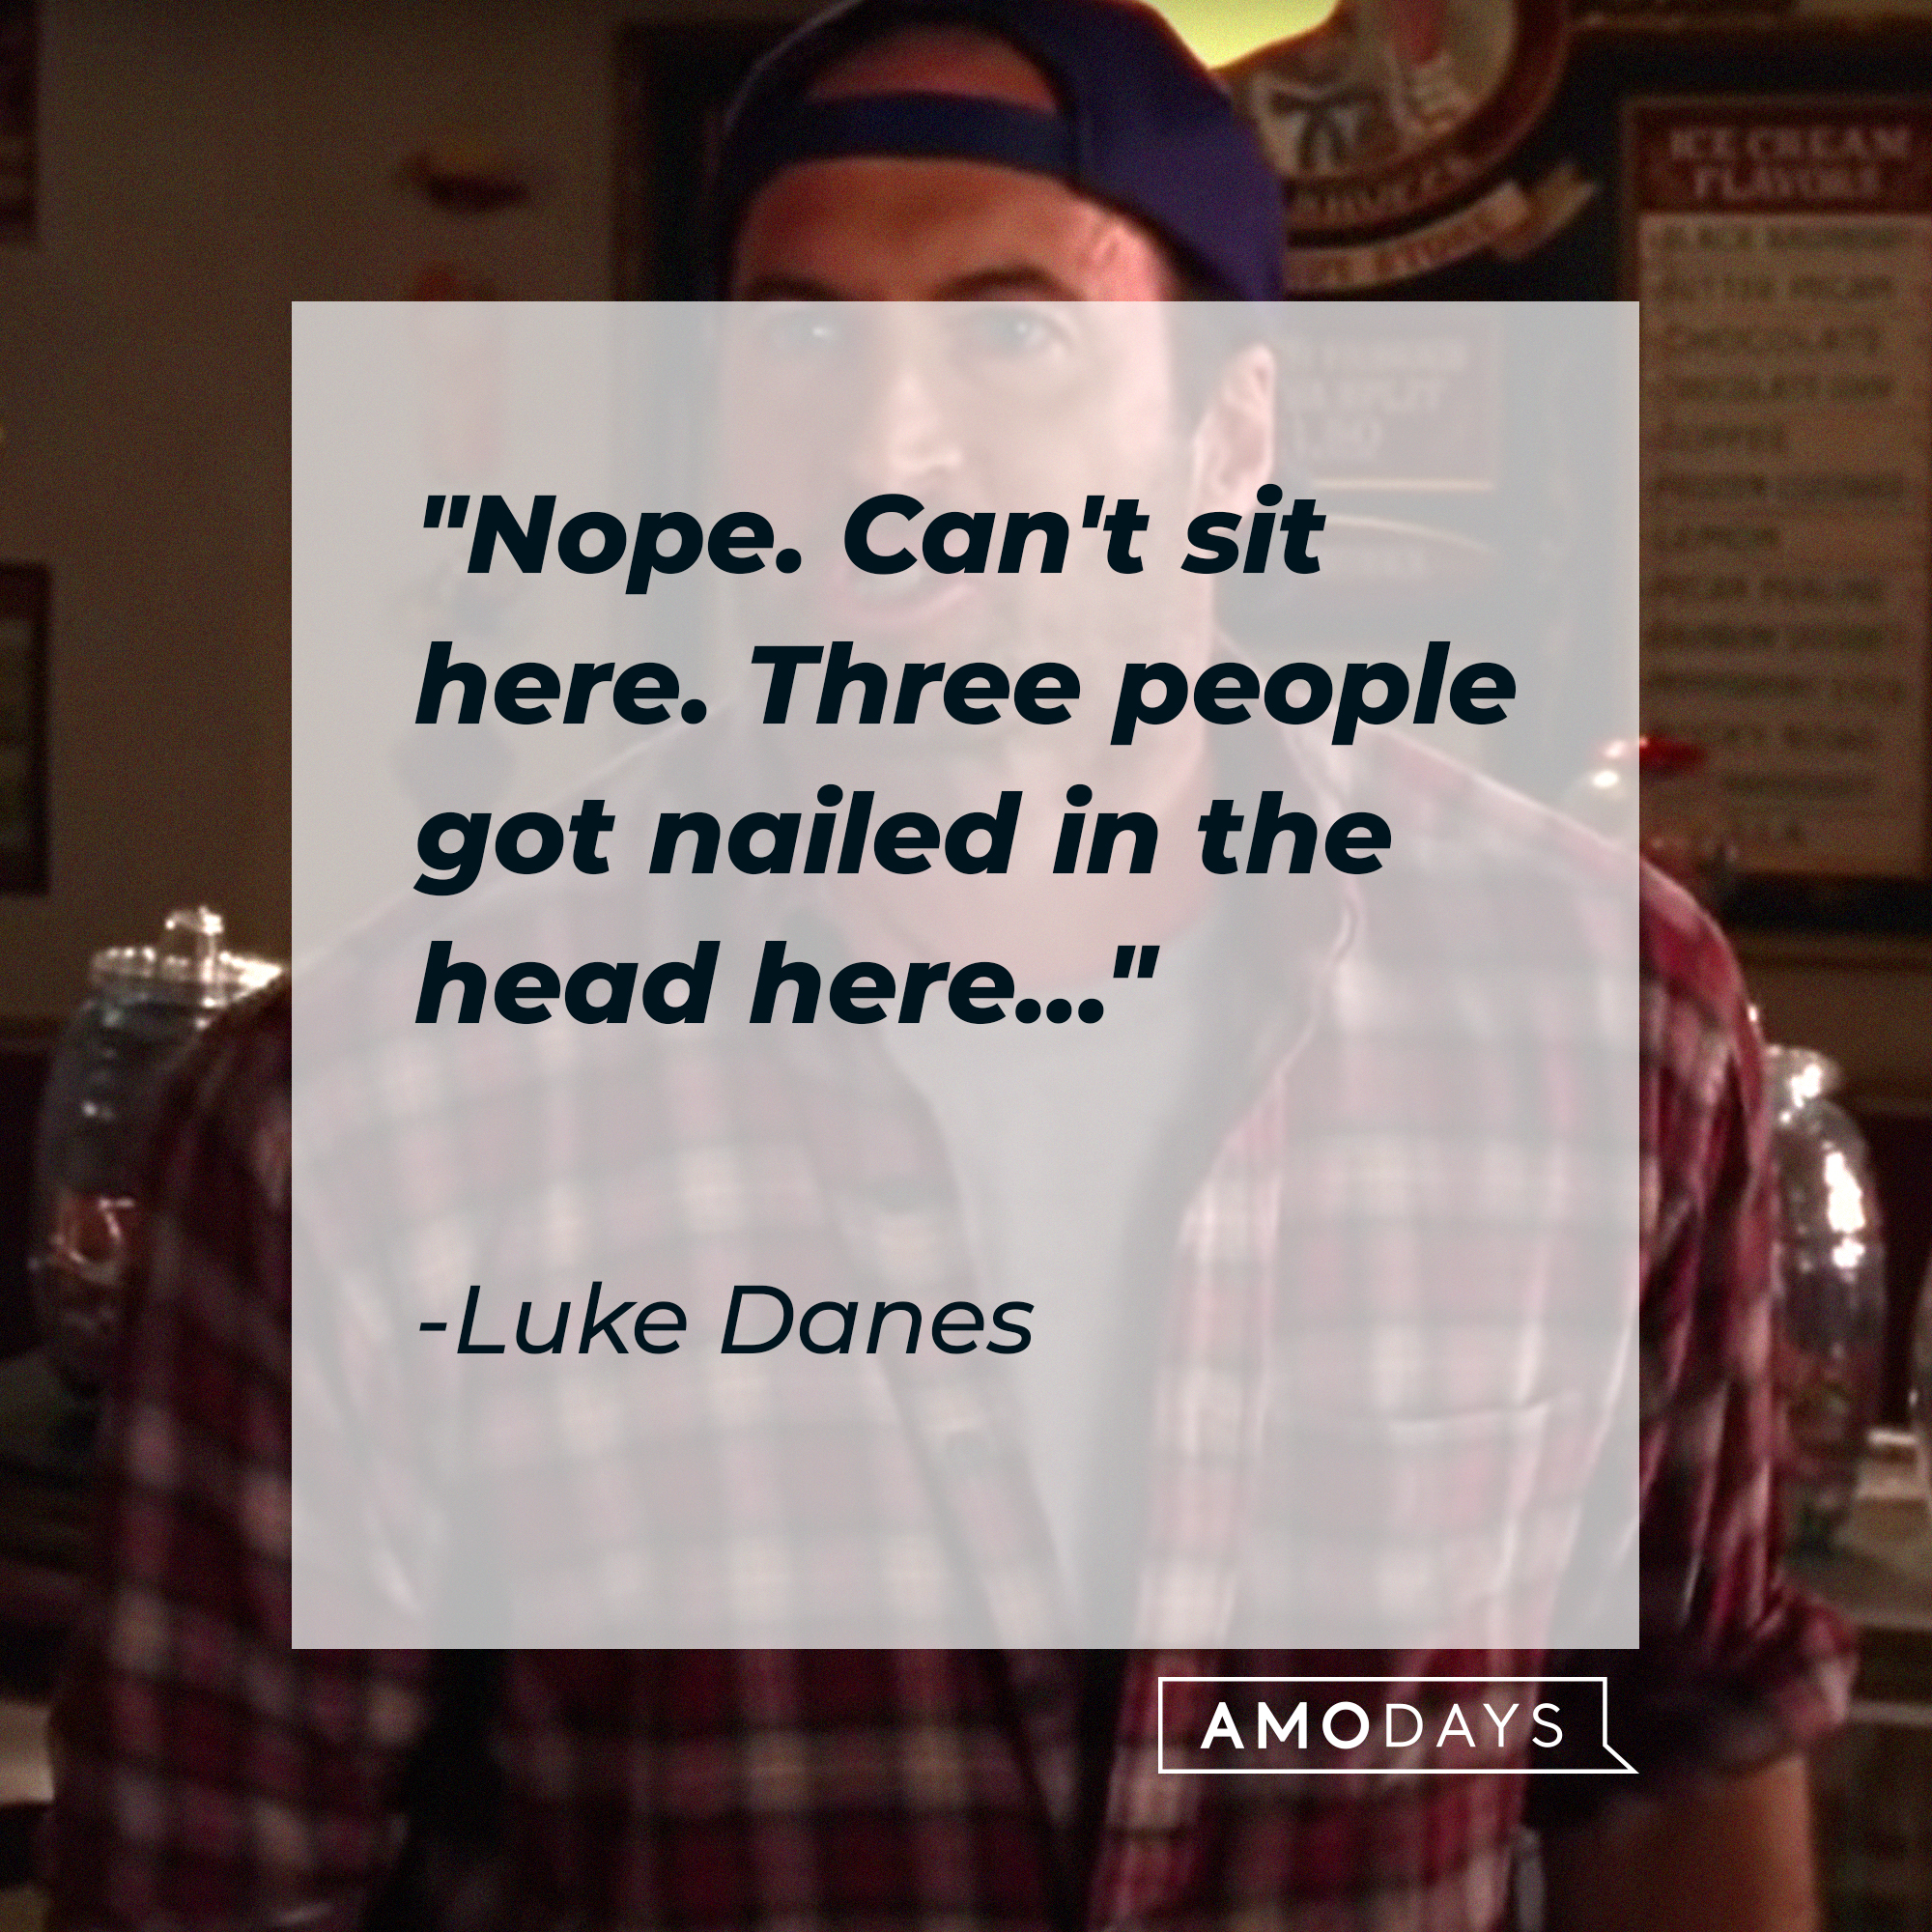 Luke Danes, with his quote: "Nope. Can't sit here. Three people got nailed in the head here..." |Source: facebook.com/GilmoreGirls